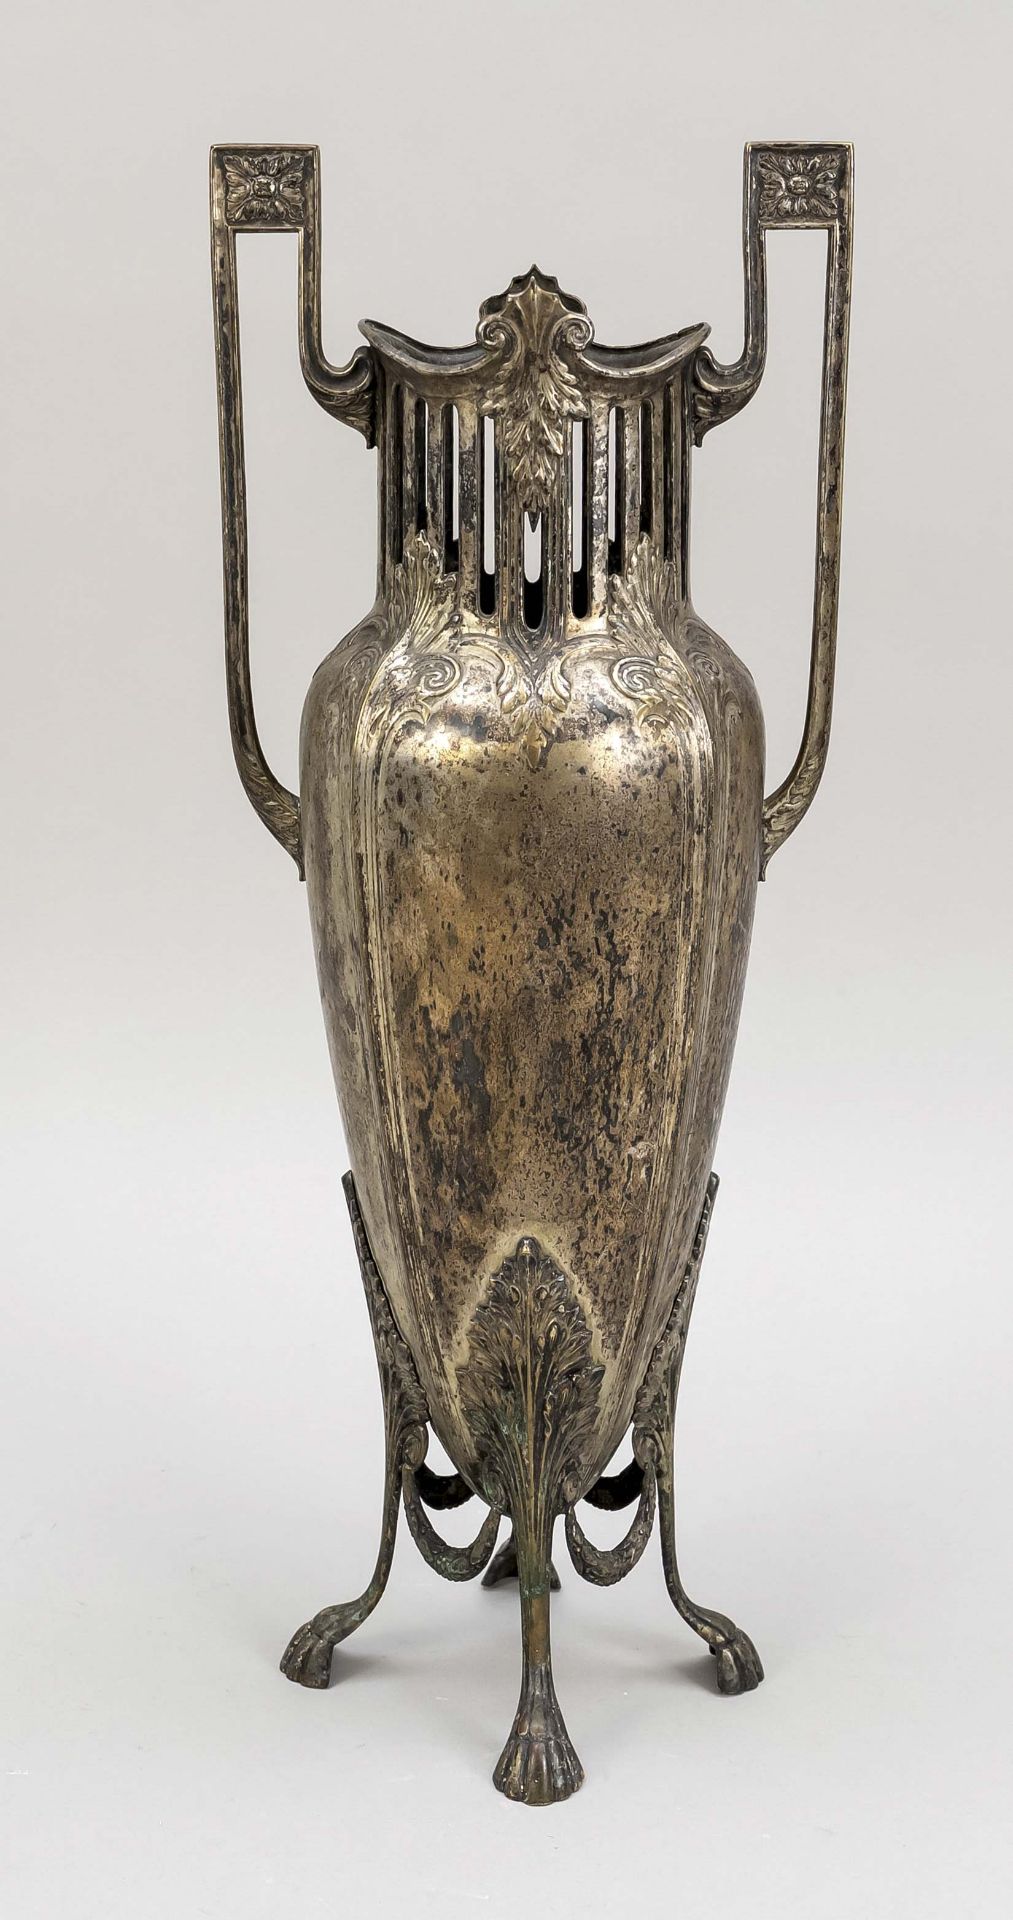 Amphora vase, late 19th century, copper? silver plated. Overlaid with foliage, openwork neck with